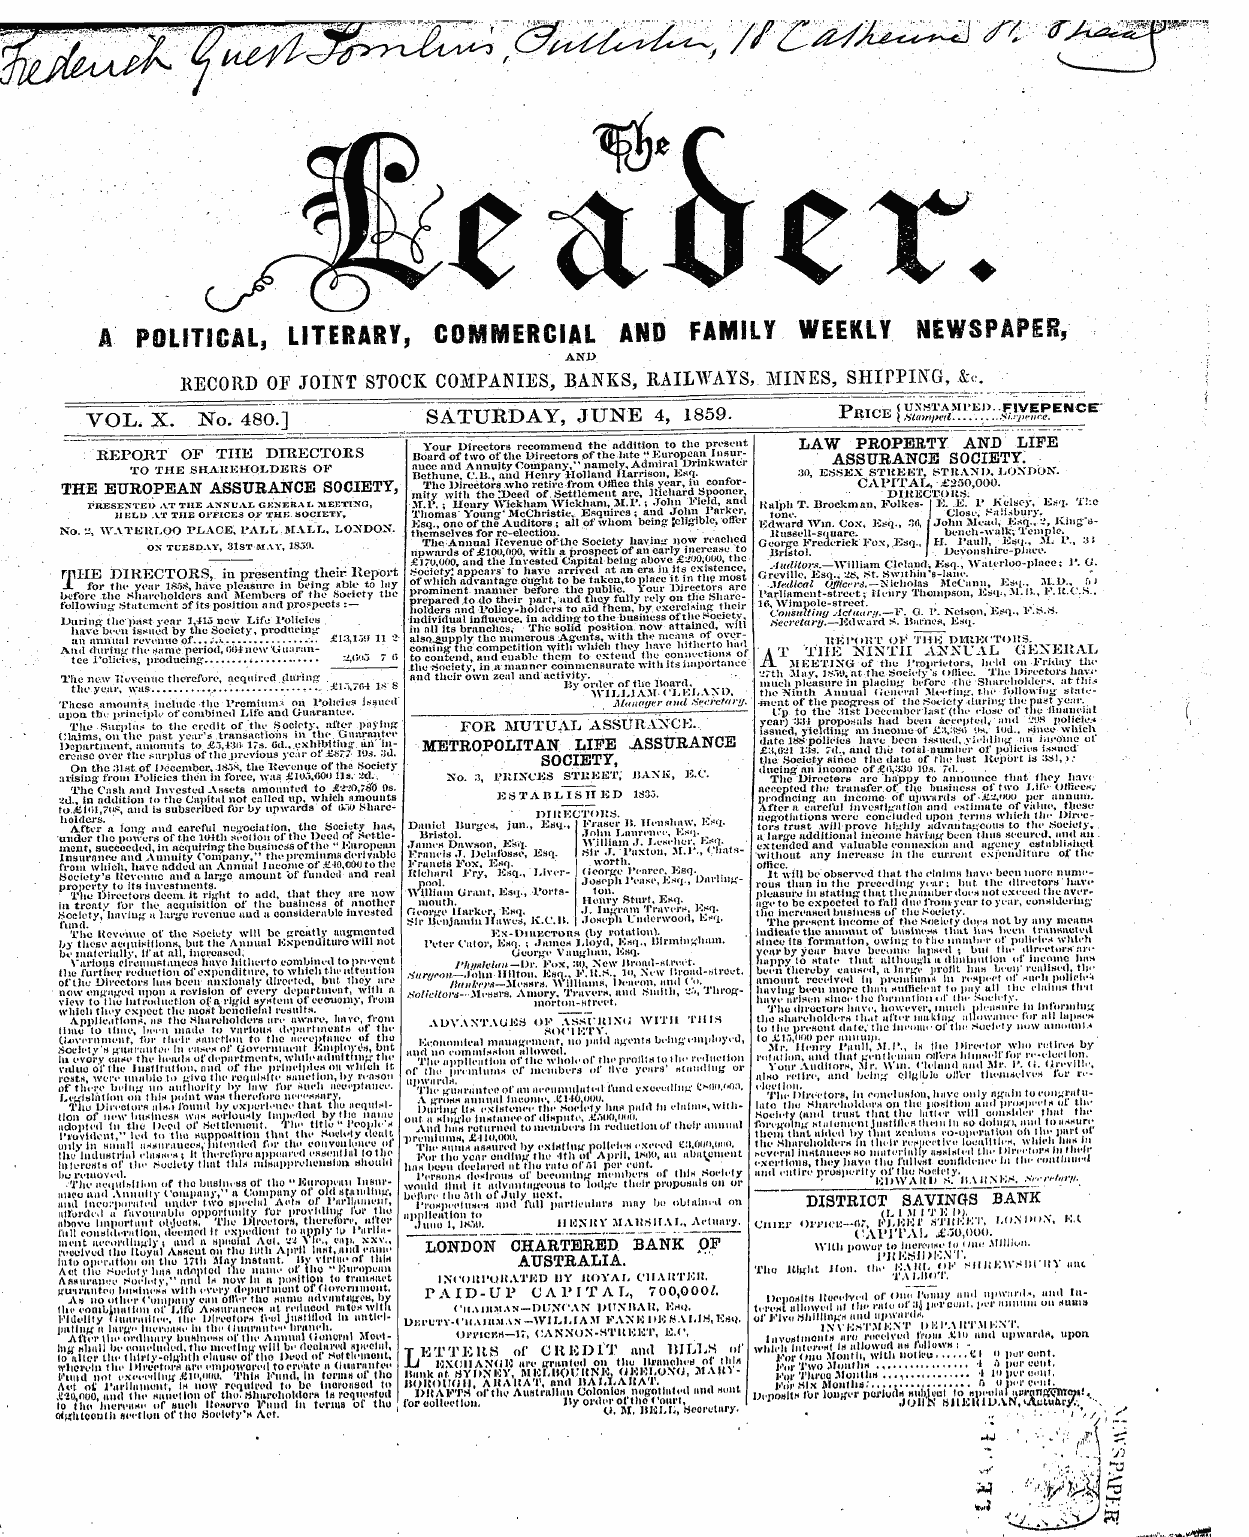 Leader (1850-1860): jS F Y, 2nd edition - Repojit O F The Directors